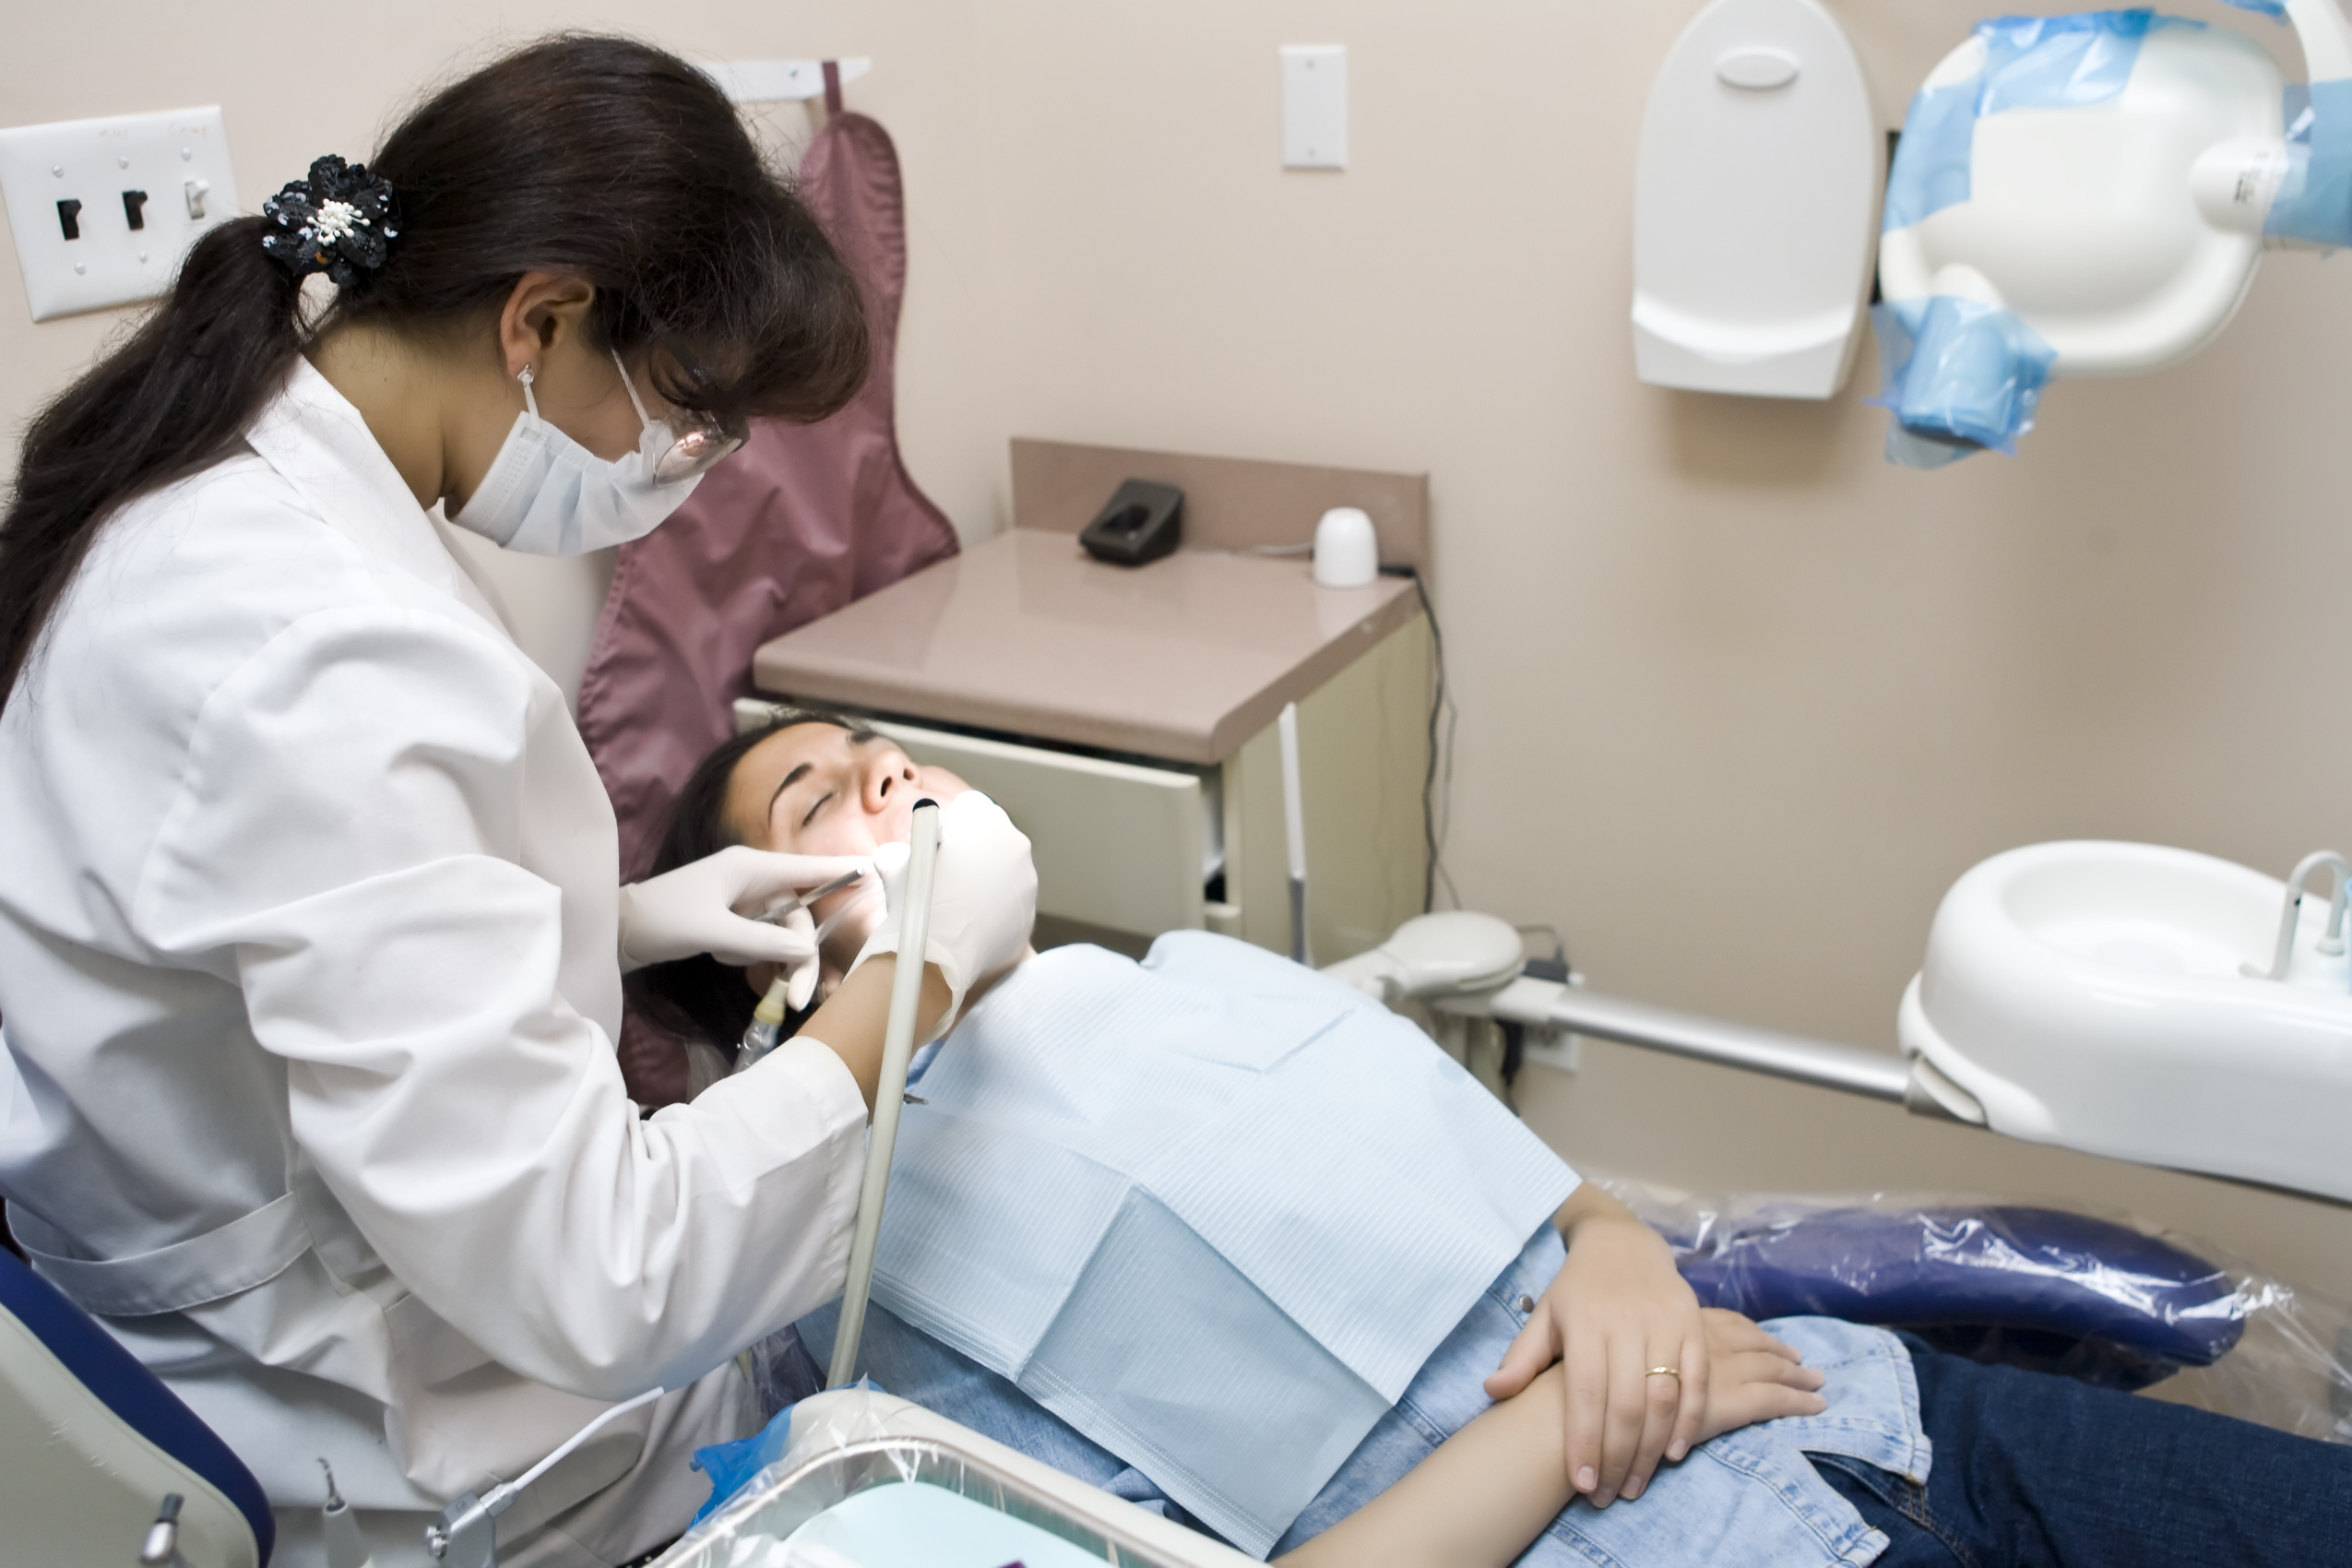  Masked and gloved periodontist treats gums of man reclining in dental chair.